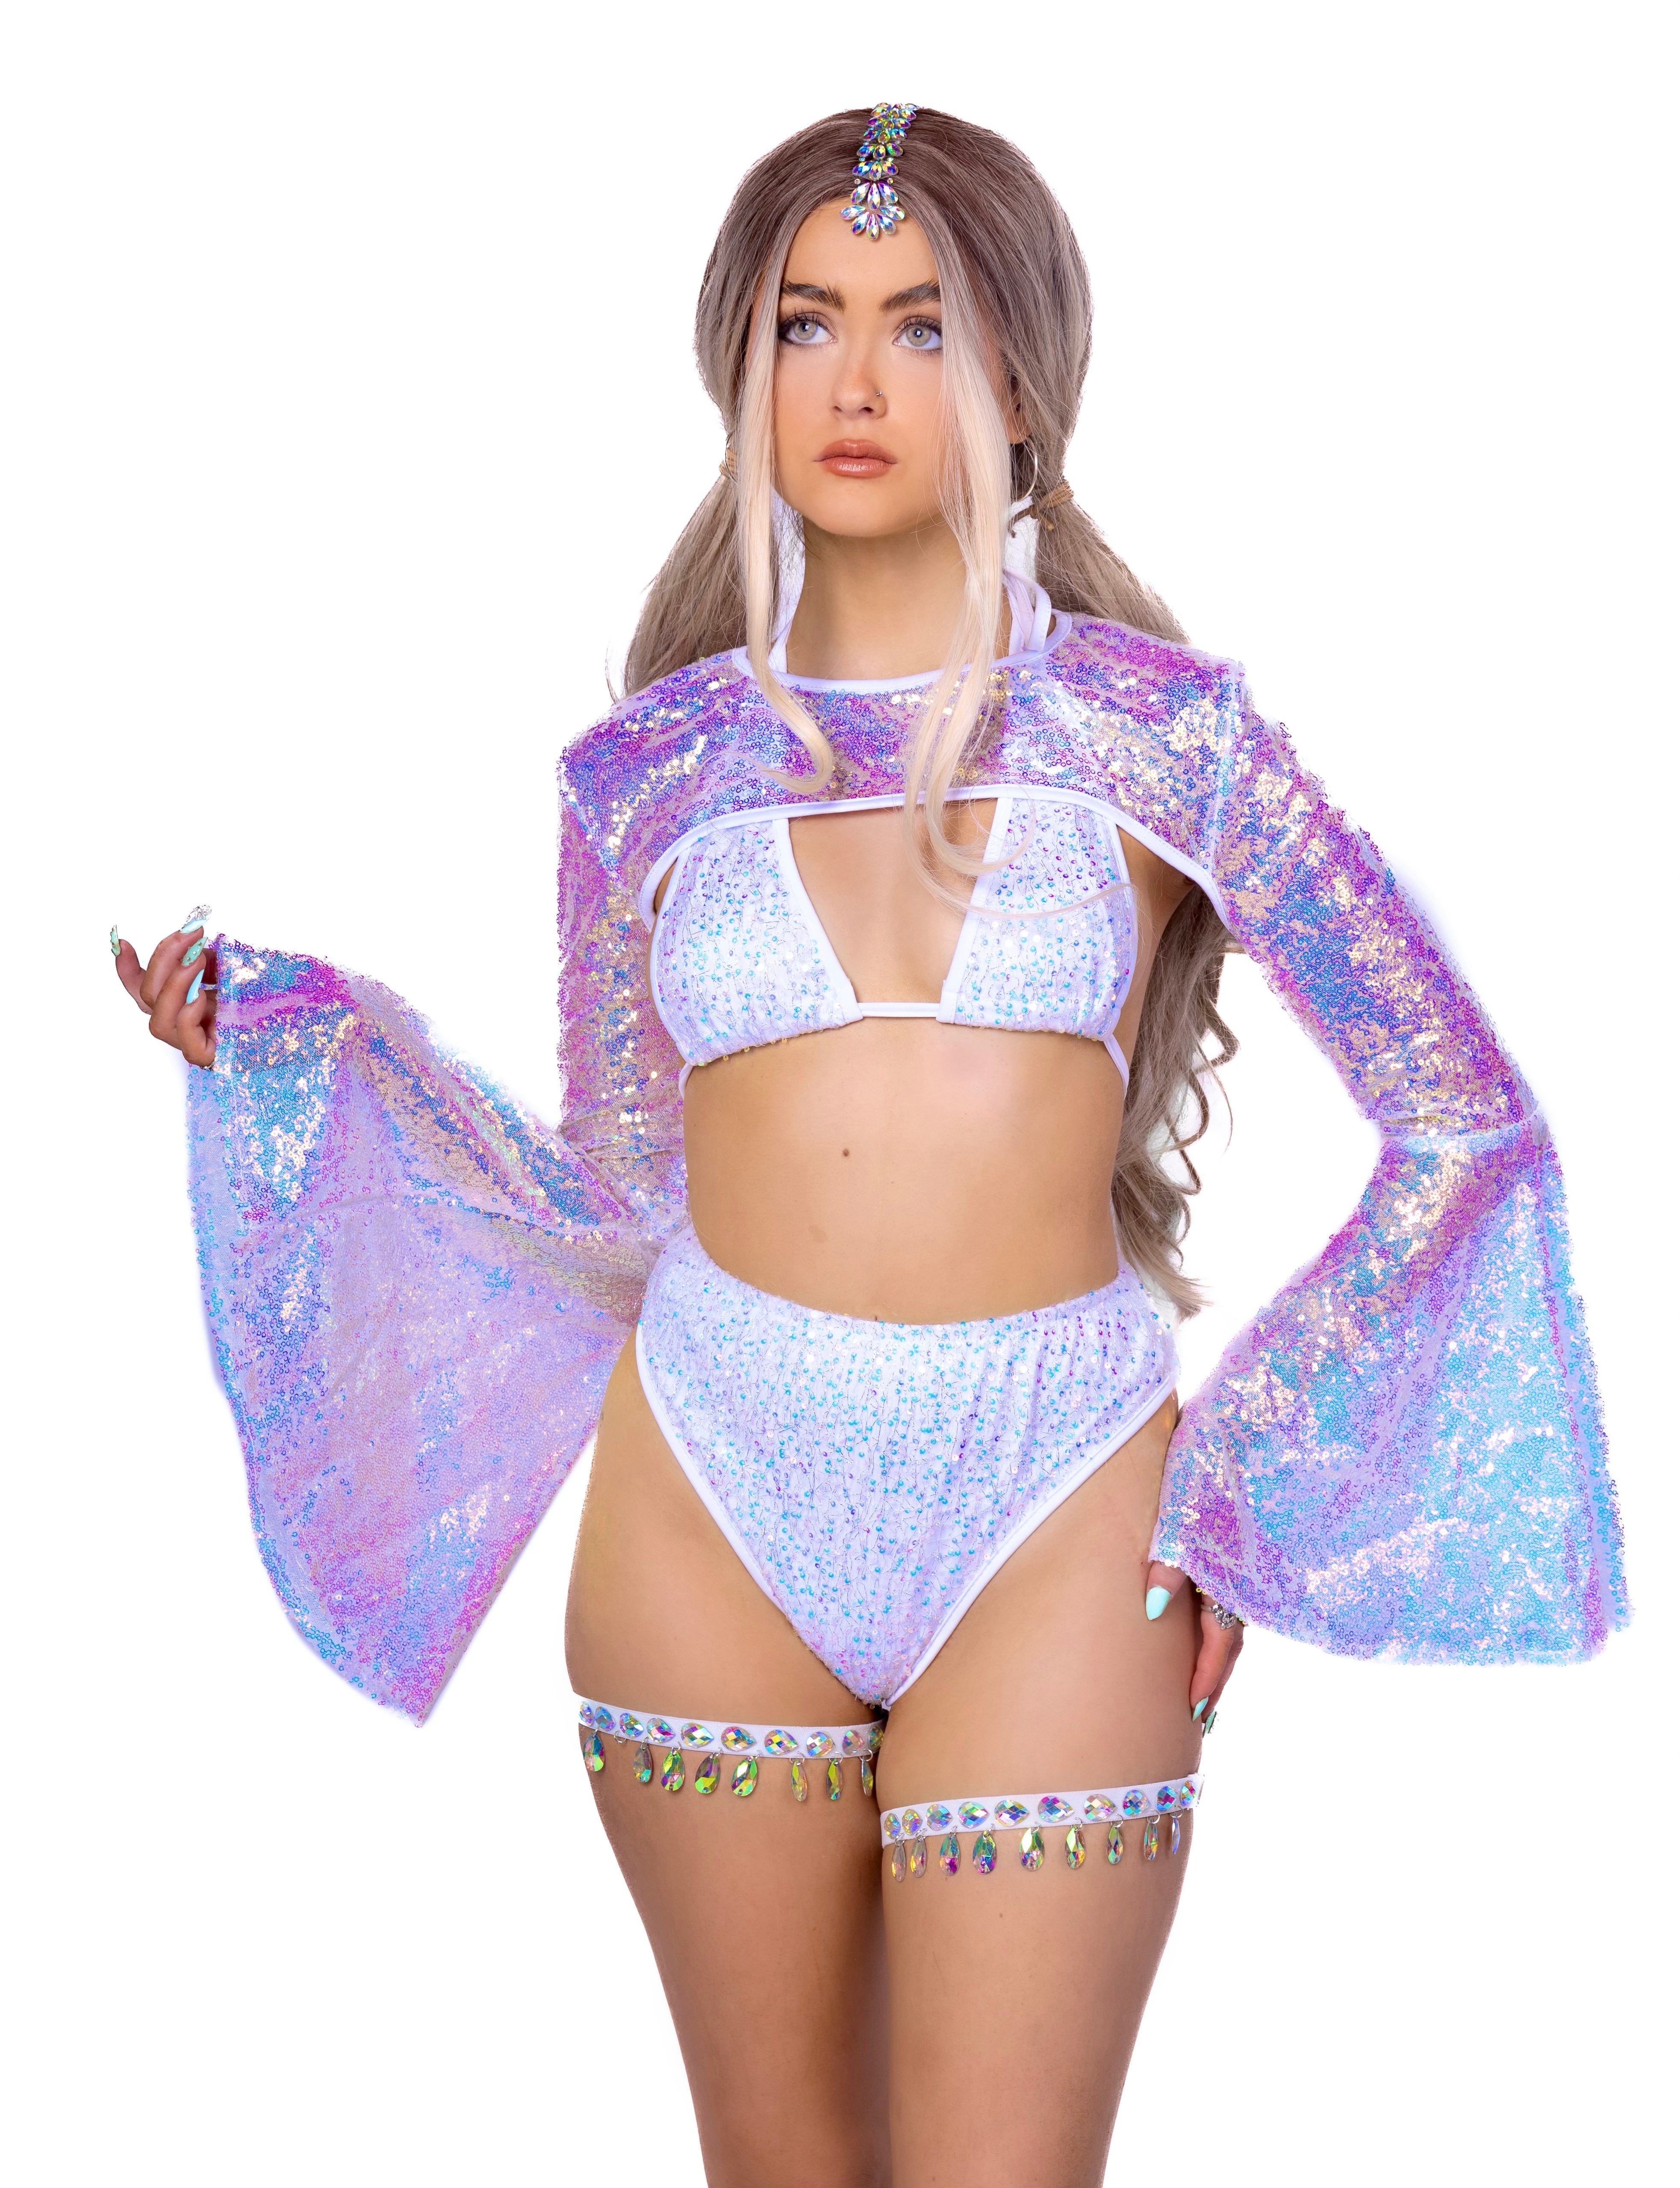 FULL OUTFIT- Iridescent Princess